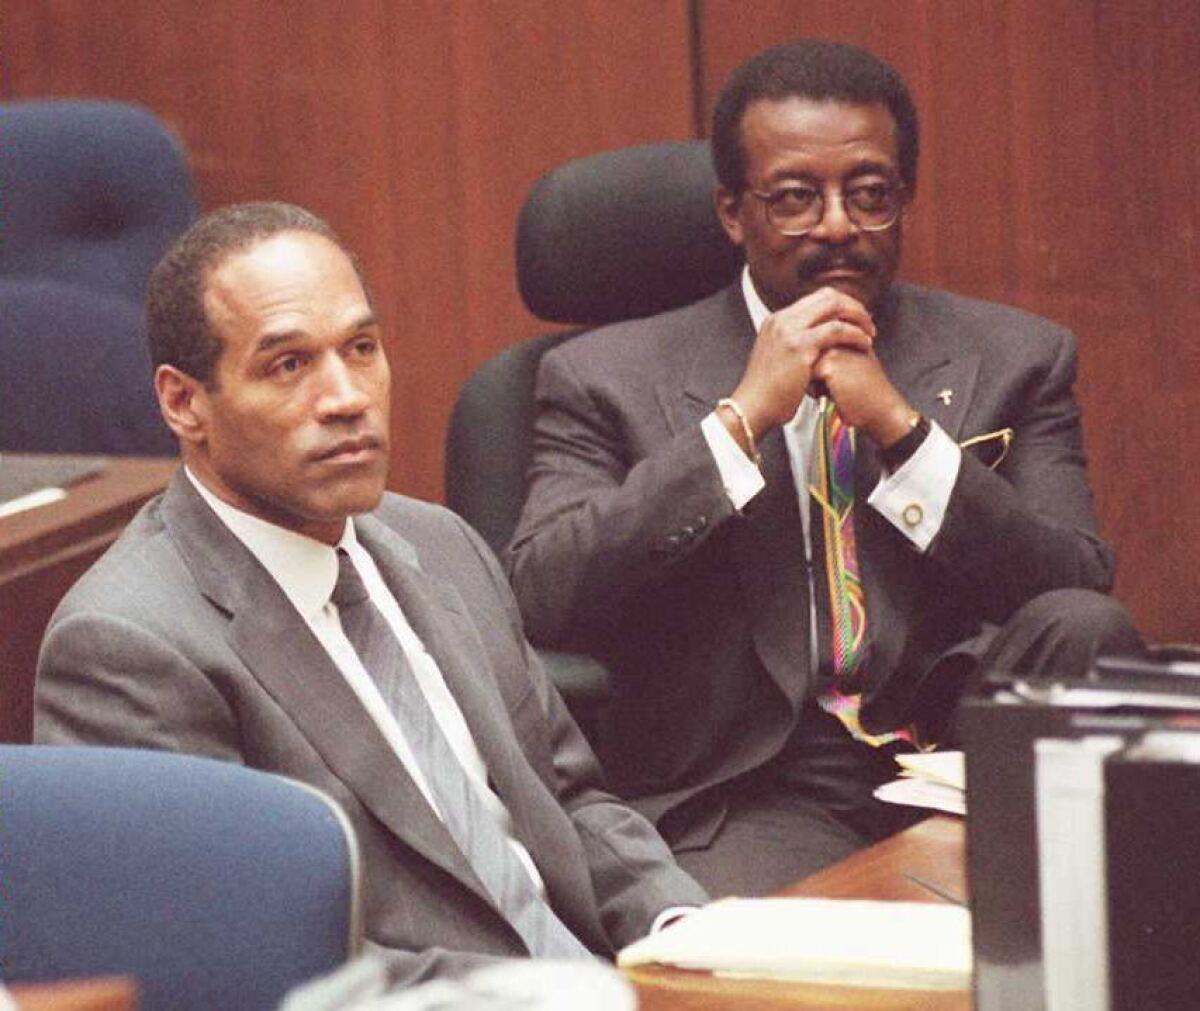 OJ Simpson (L) and attorney Johnnie Cochran Jr. listen to Judge Lance Ito moments after the prosecution rested its case during Simpson's murder trial in Los Angeles.